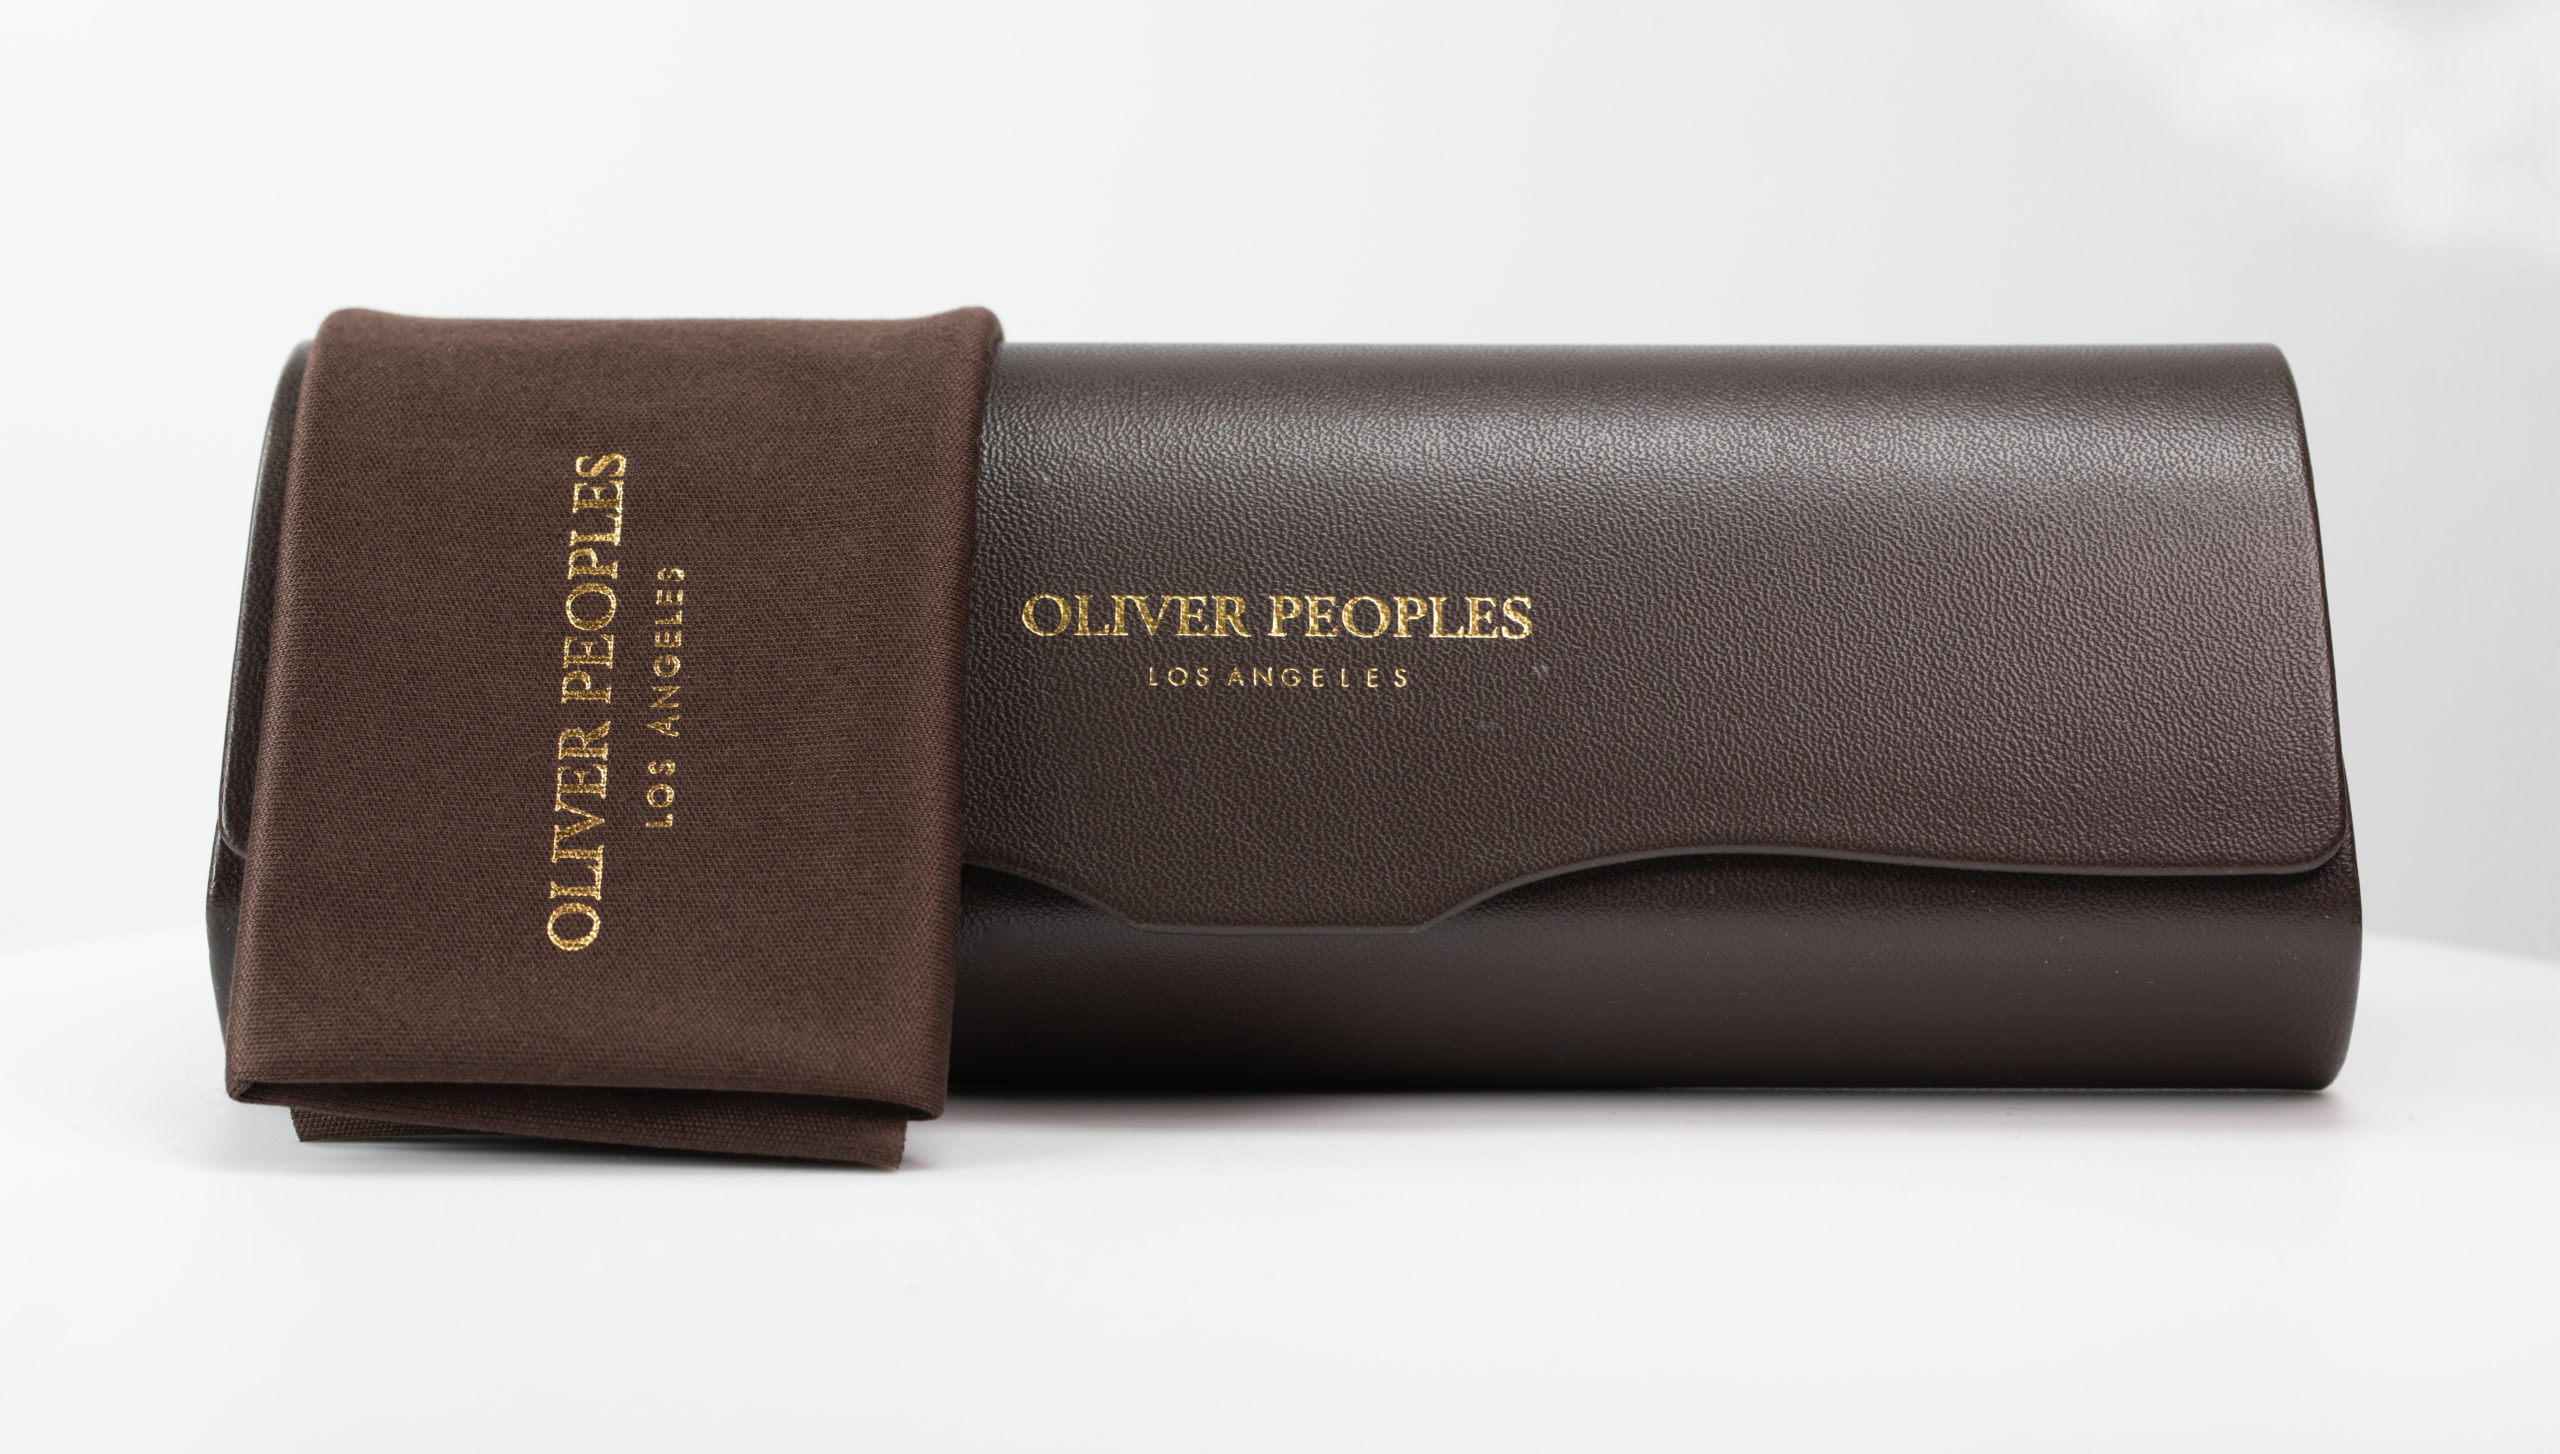 Oliver Peoples Cloth and Case supplied. - Richard Owens Opticians